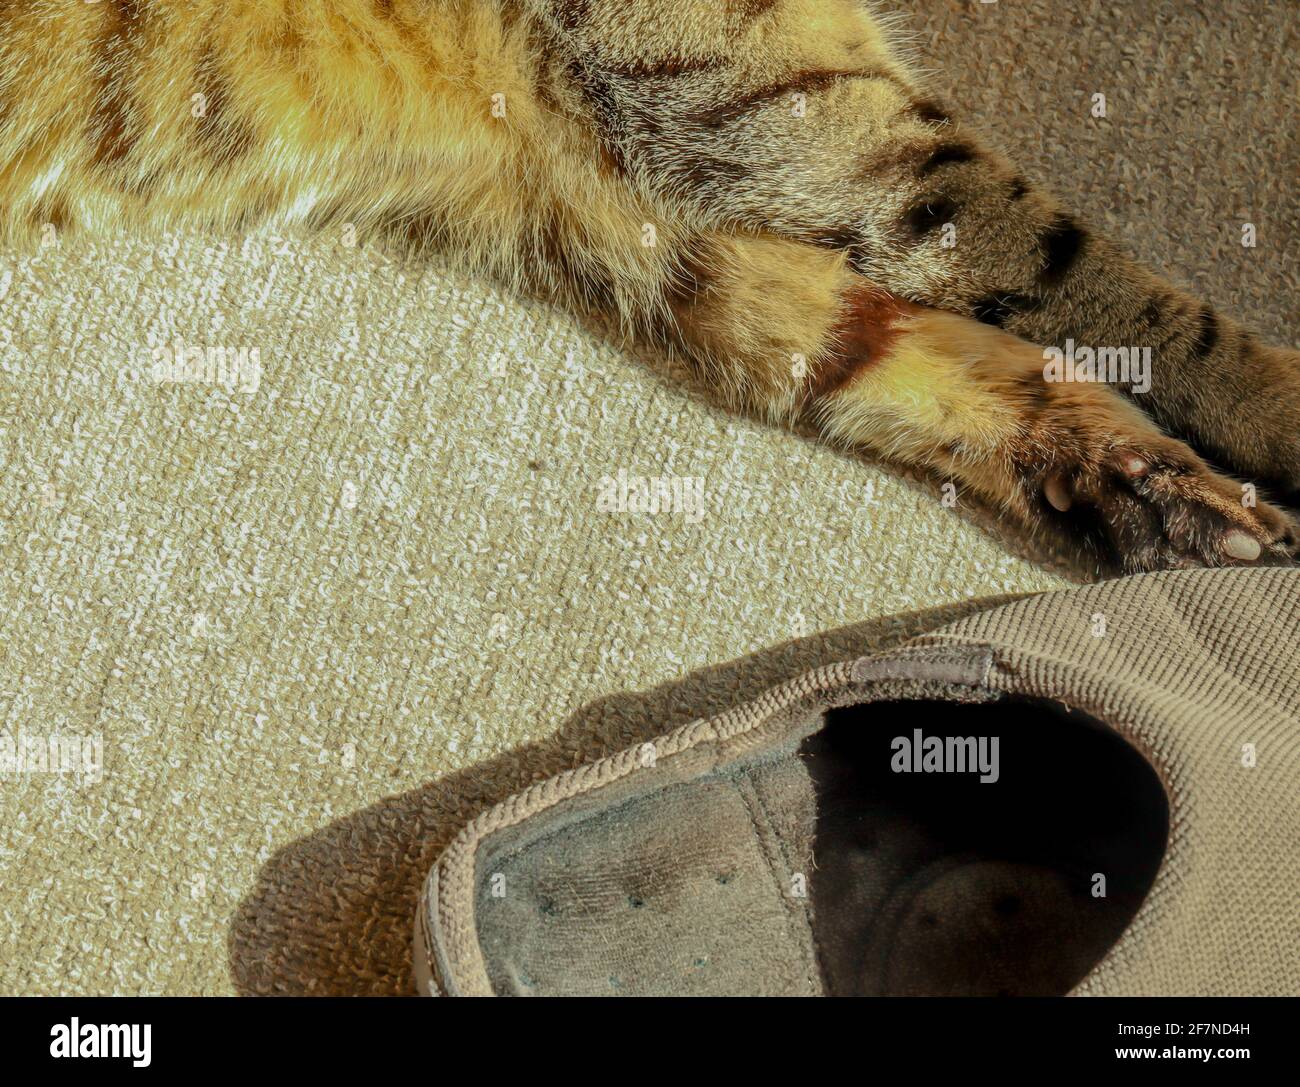 Abstract image of a cat lying in the sun with its paws on some old slippers Stock Photo